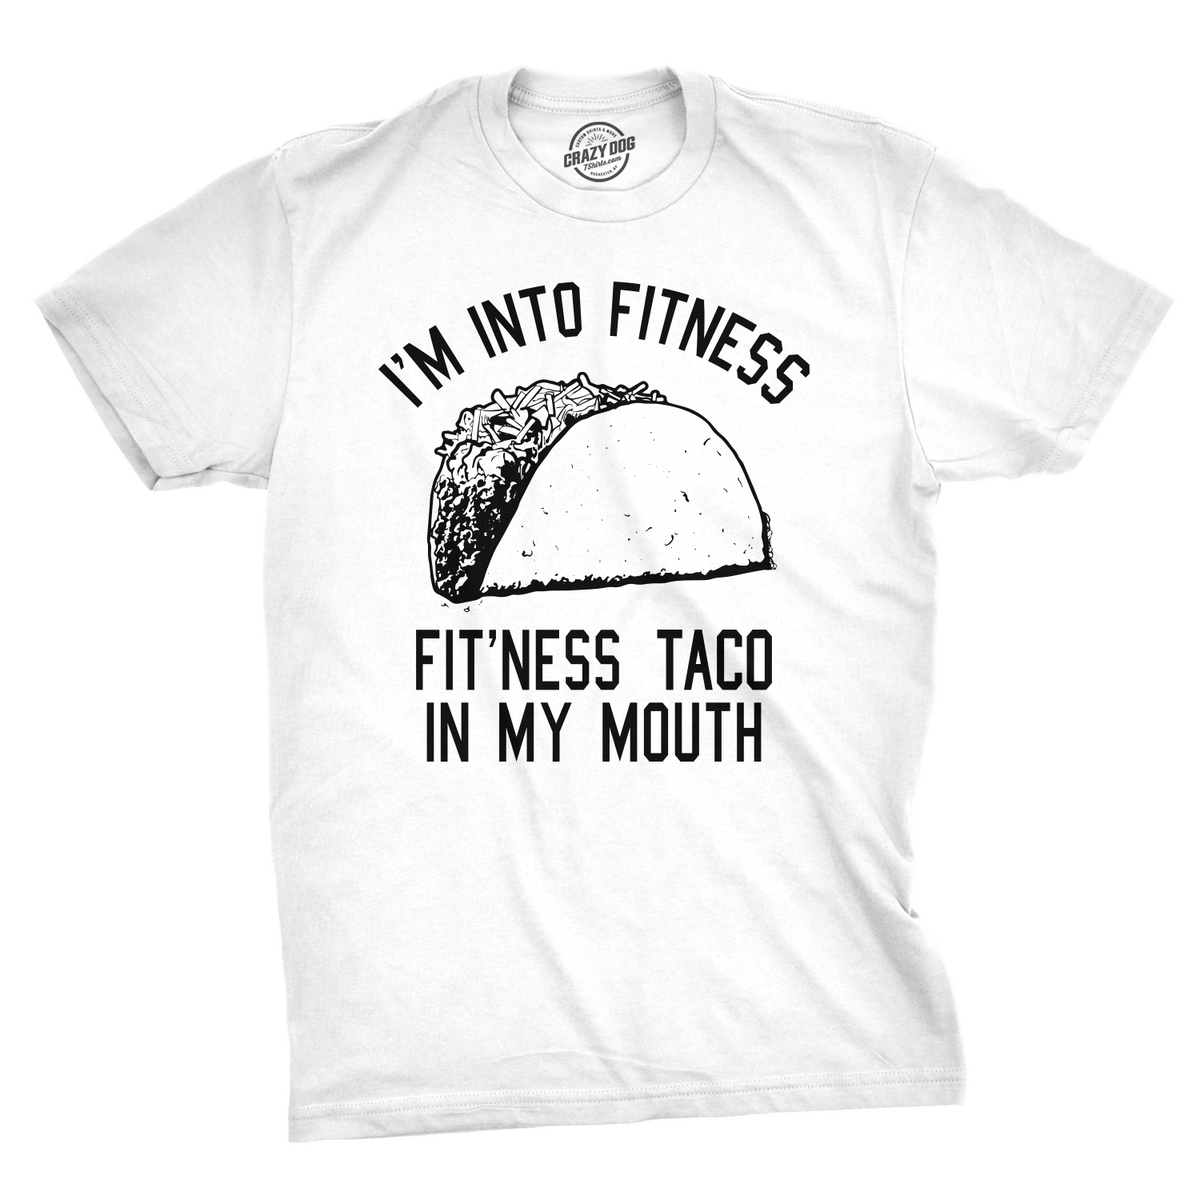 Funny White Fitness Taco In My Mouth Mens T Shirt Nerdy Cinco De Mayo Fitness Food Tee